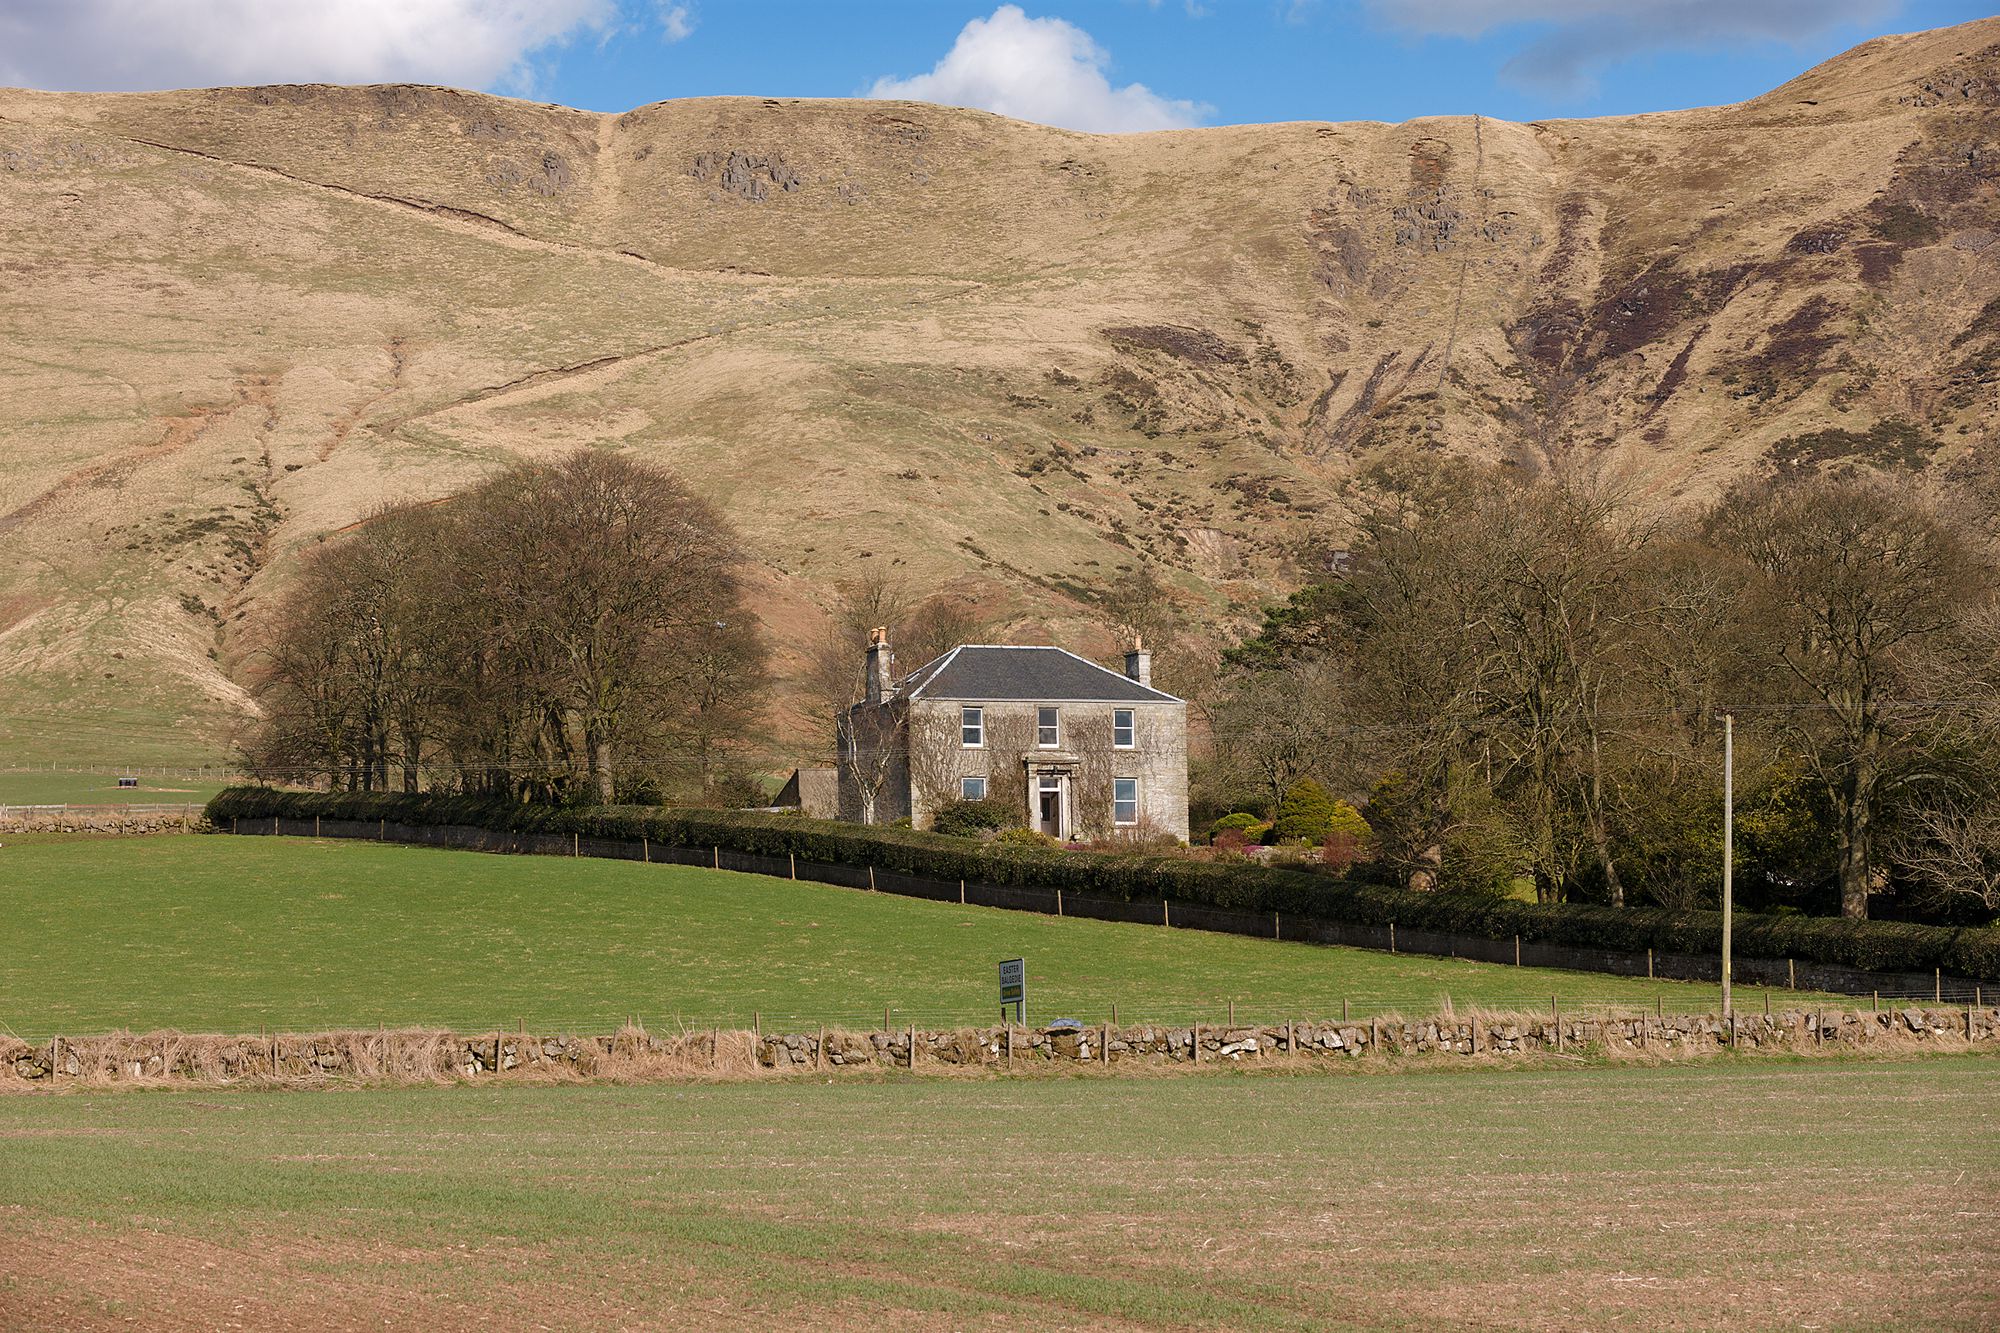 Self-Catering in Central Scotland holidays at Cool Places